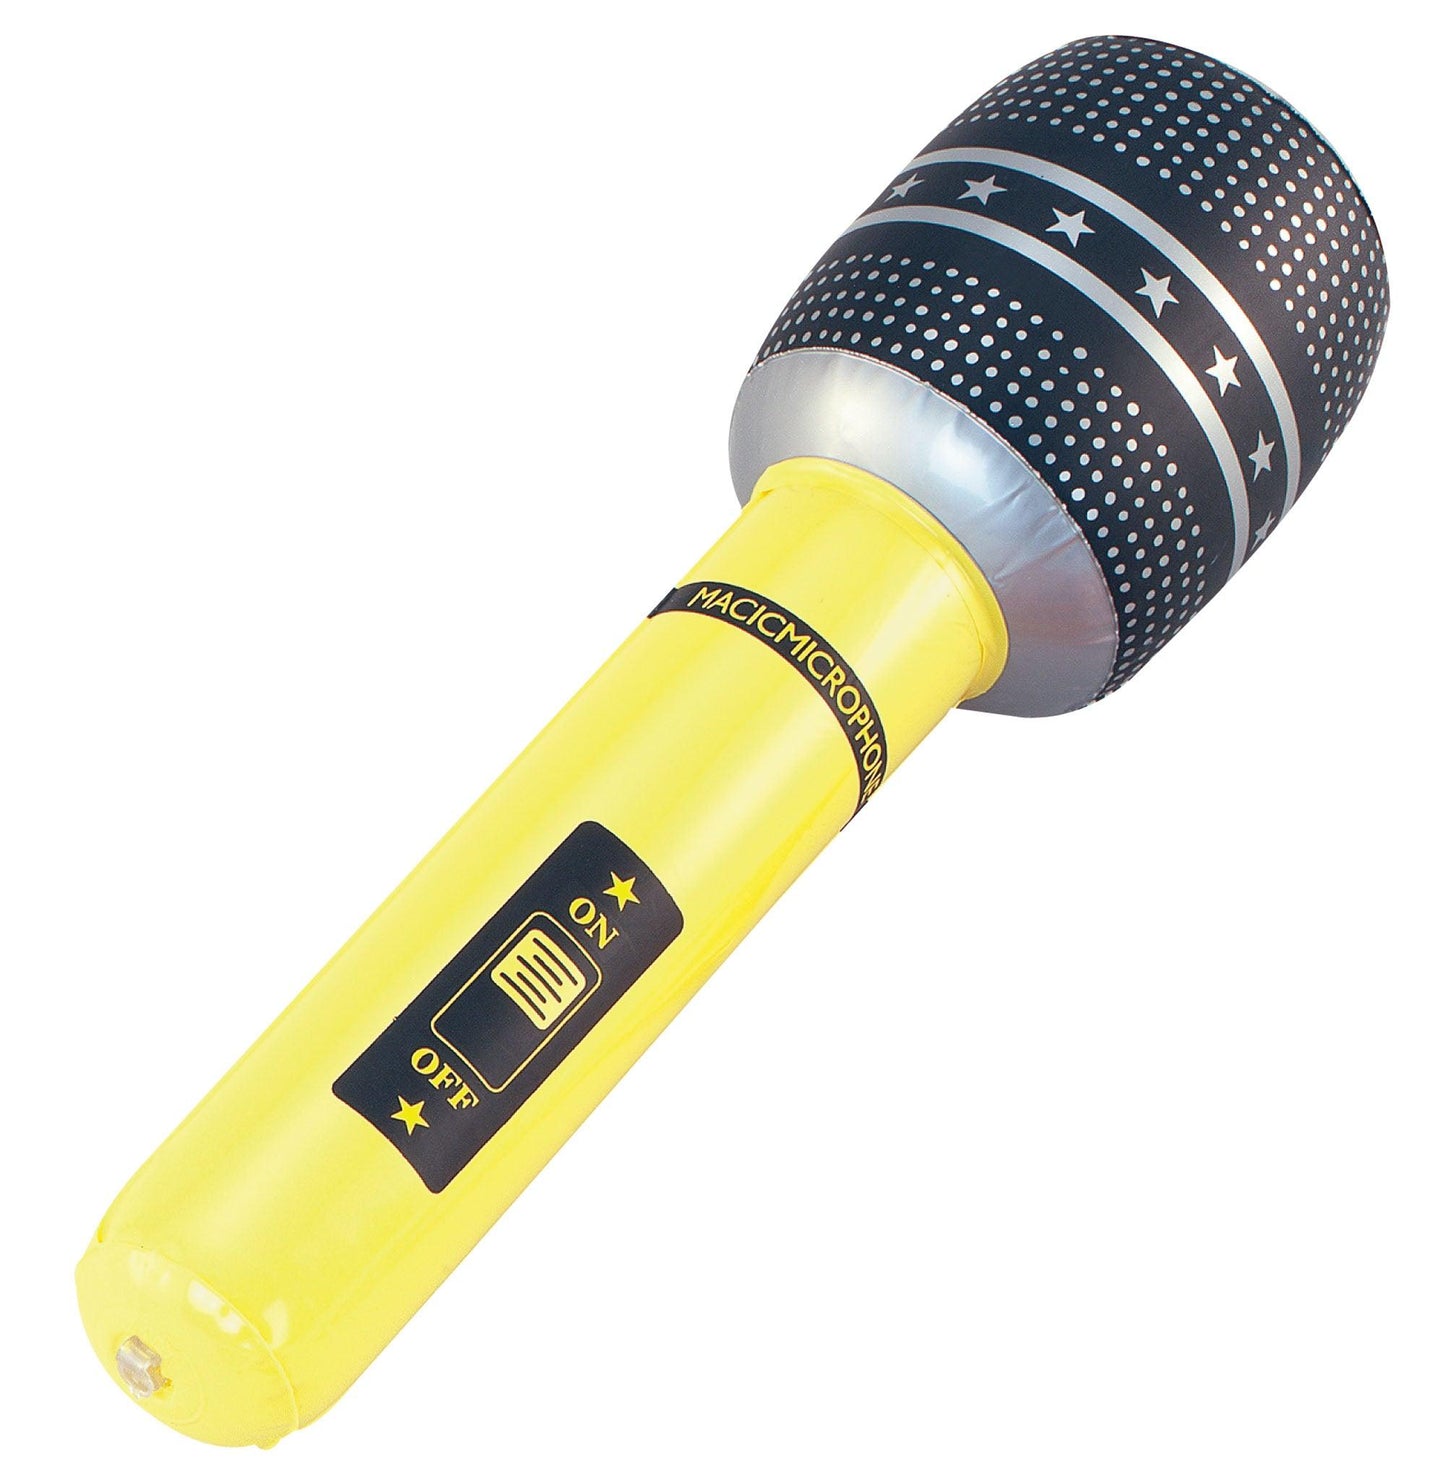 Inflatable Microphone - Labreeze